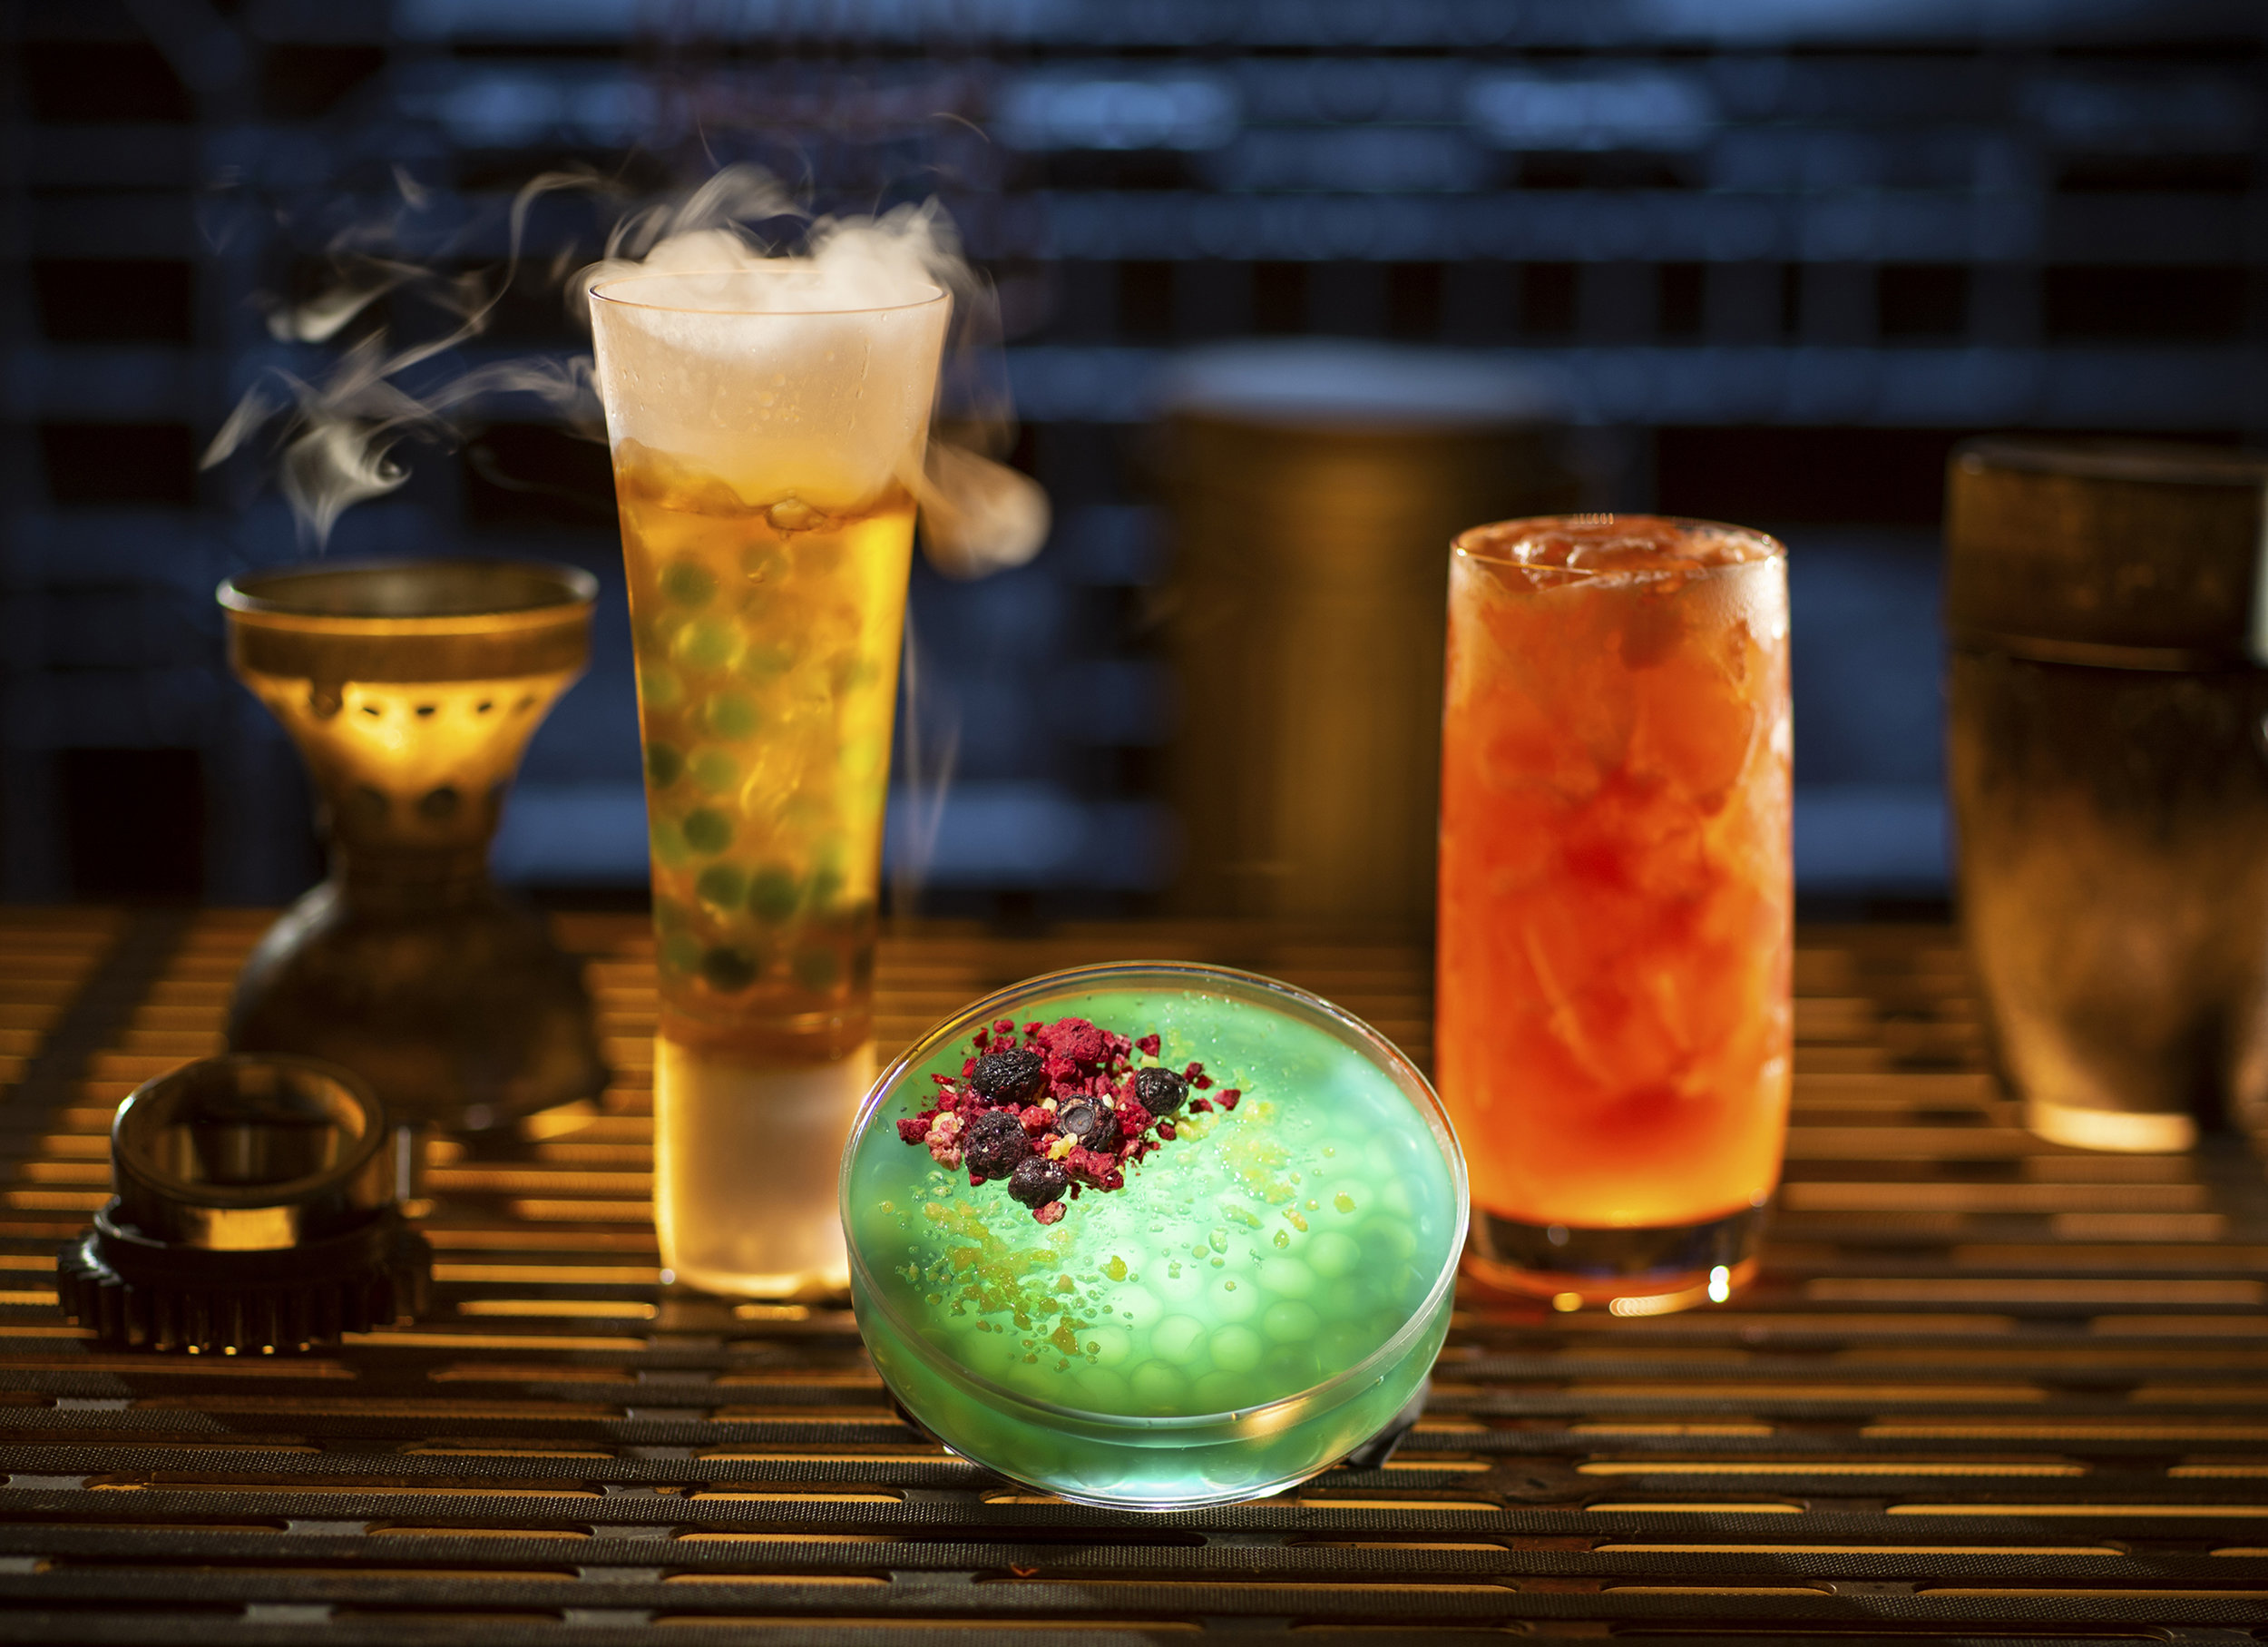  Guests will discover innovative and creative concoctions from around the galaxy at Star Wars: Galaxy's Edge at Disneyland Park in Anaheim, California and at Disney's Hollywood Studios in Lake Buena Vista, Florida. Left to right, non-alcoholic drinks